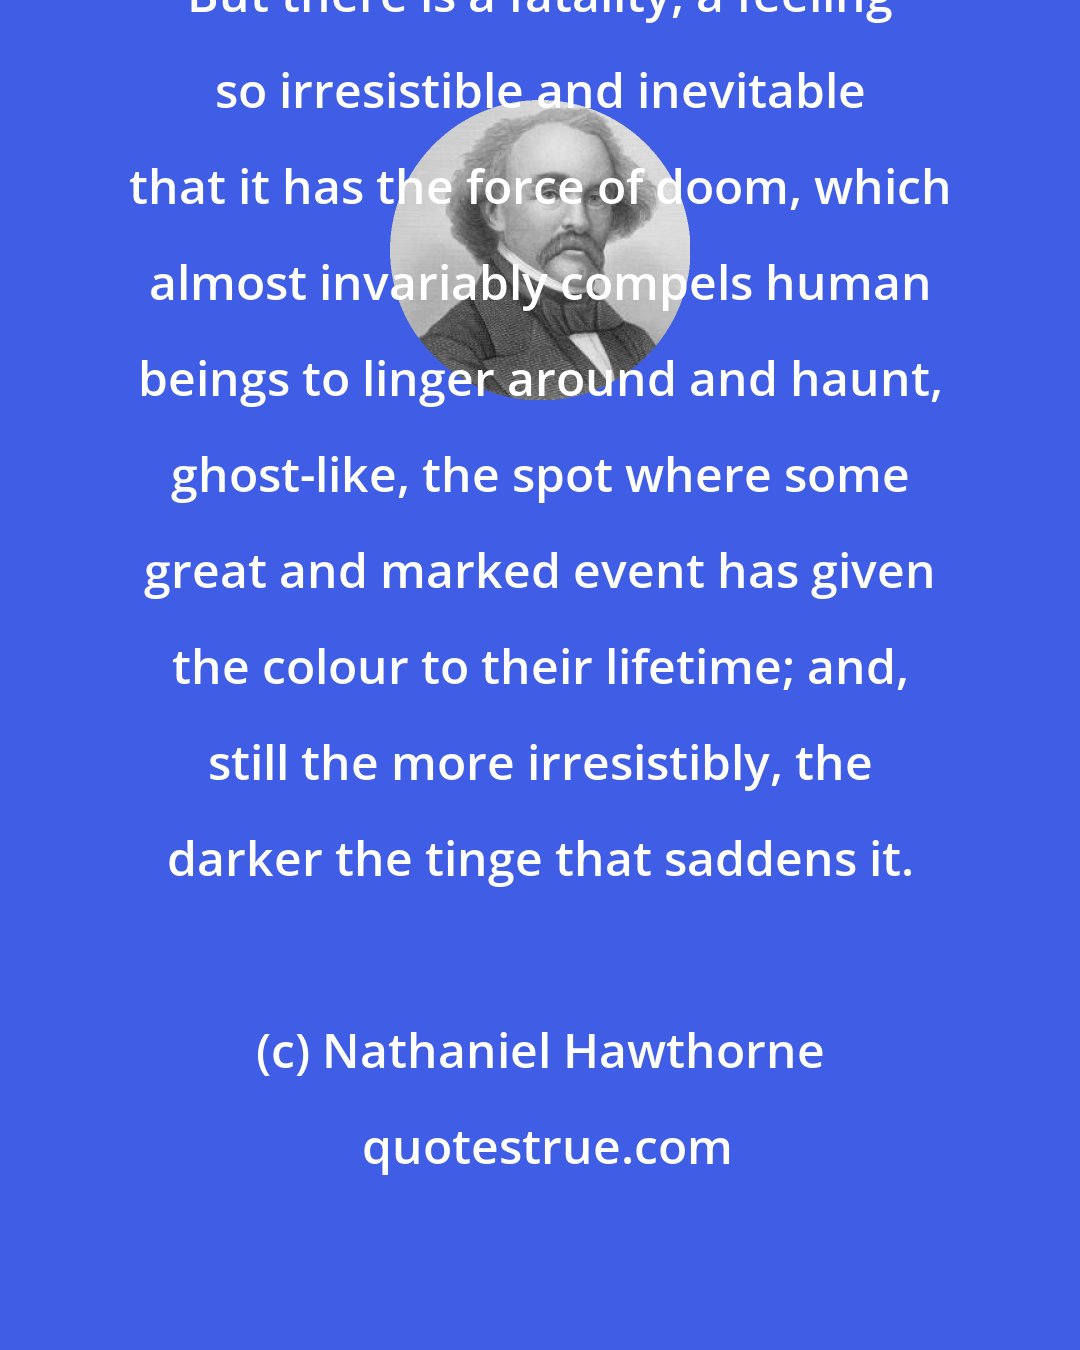 Nathaniel Hawthorne: But there is a fatality, a feeling so irresistible and inevitable that it has the force of doom, which almost invariably compels human beings to linger around and haunt, ghost-like, the spot where some great and marked event has given the colour to their lifetime; and, still the more irresistibly, the darker the tinge that saddens it.